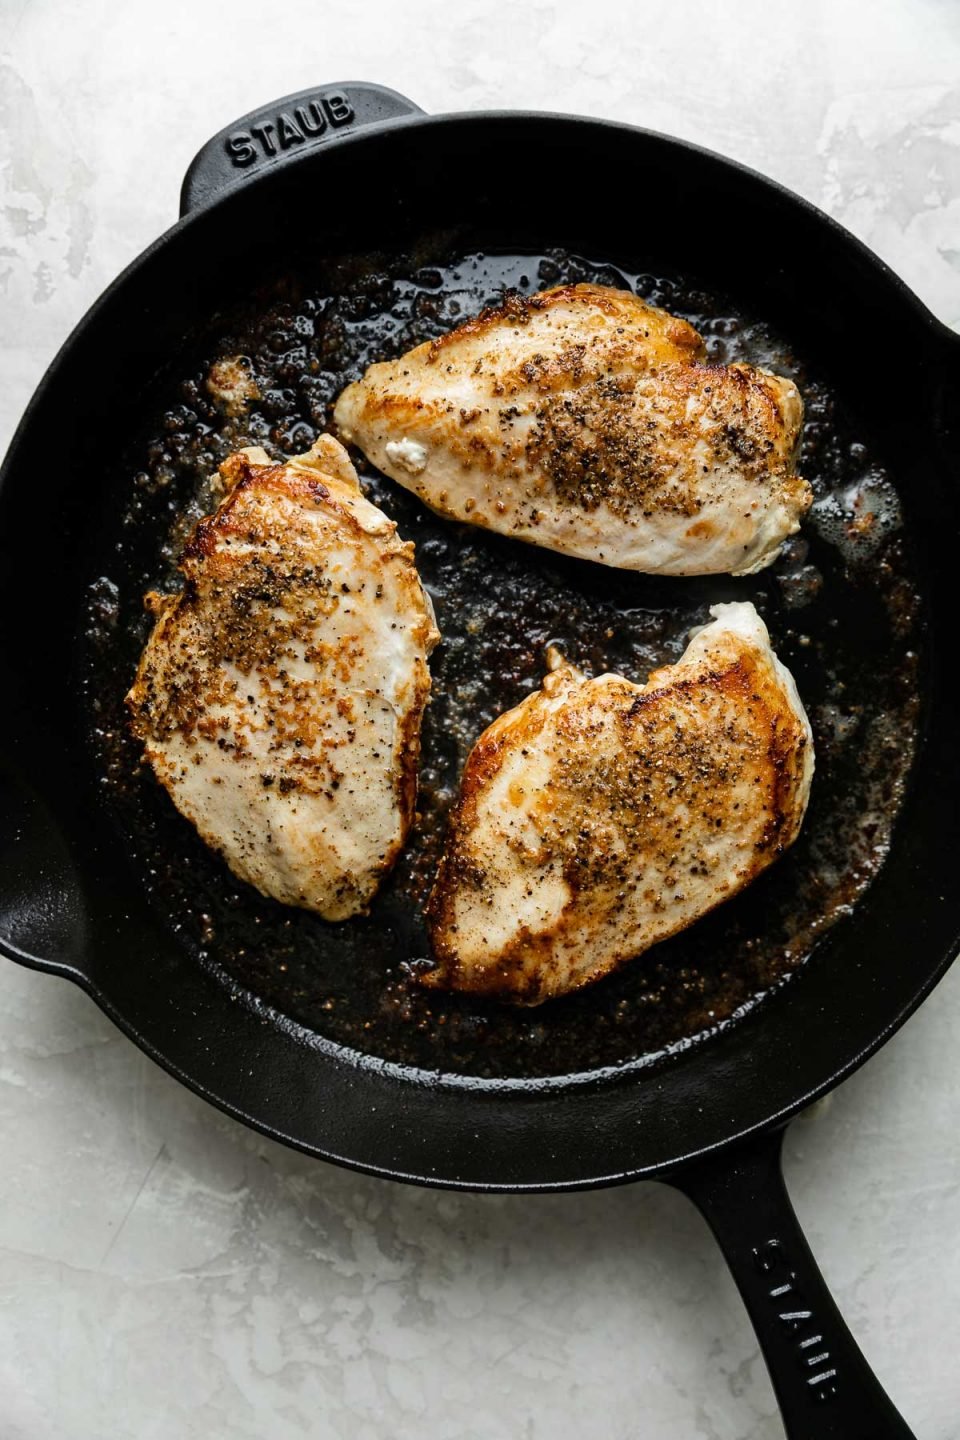 Three browned chicken breasts, seasoned with salt & pepper, in a Staub black cast iron skillet rest atop a creamy white textured surface.